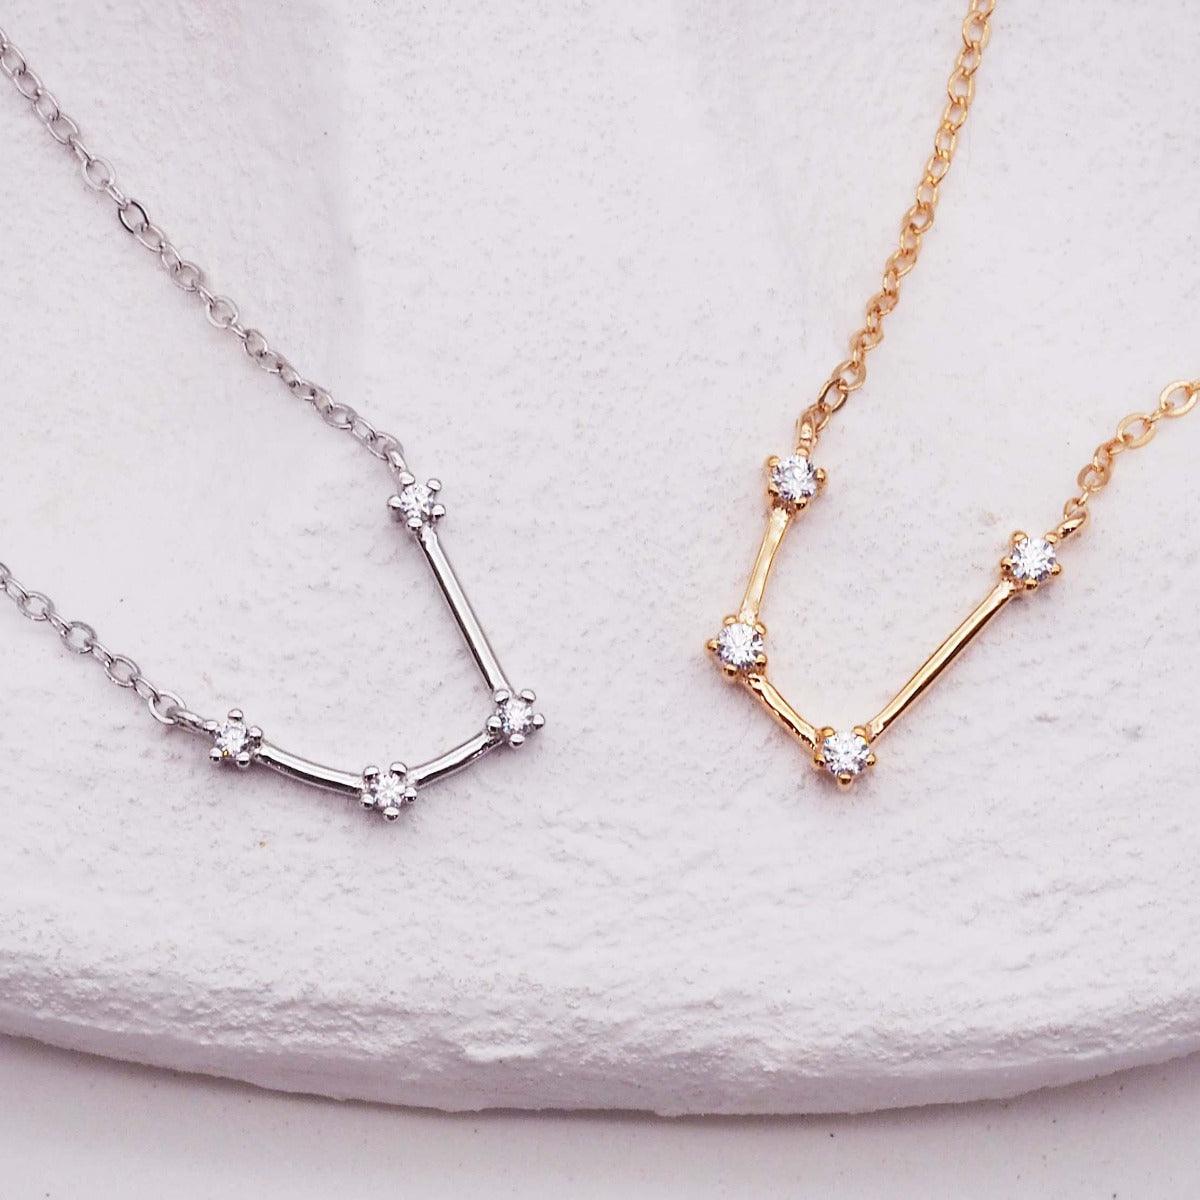 Aquarius Constellation Necklace - womens jewellery by indie and harper